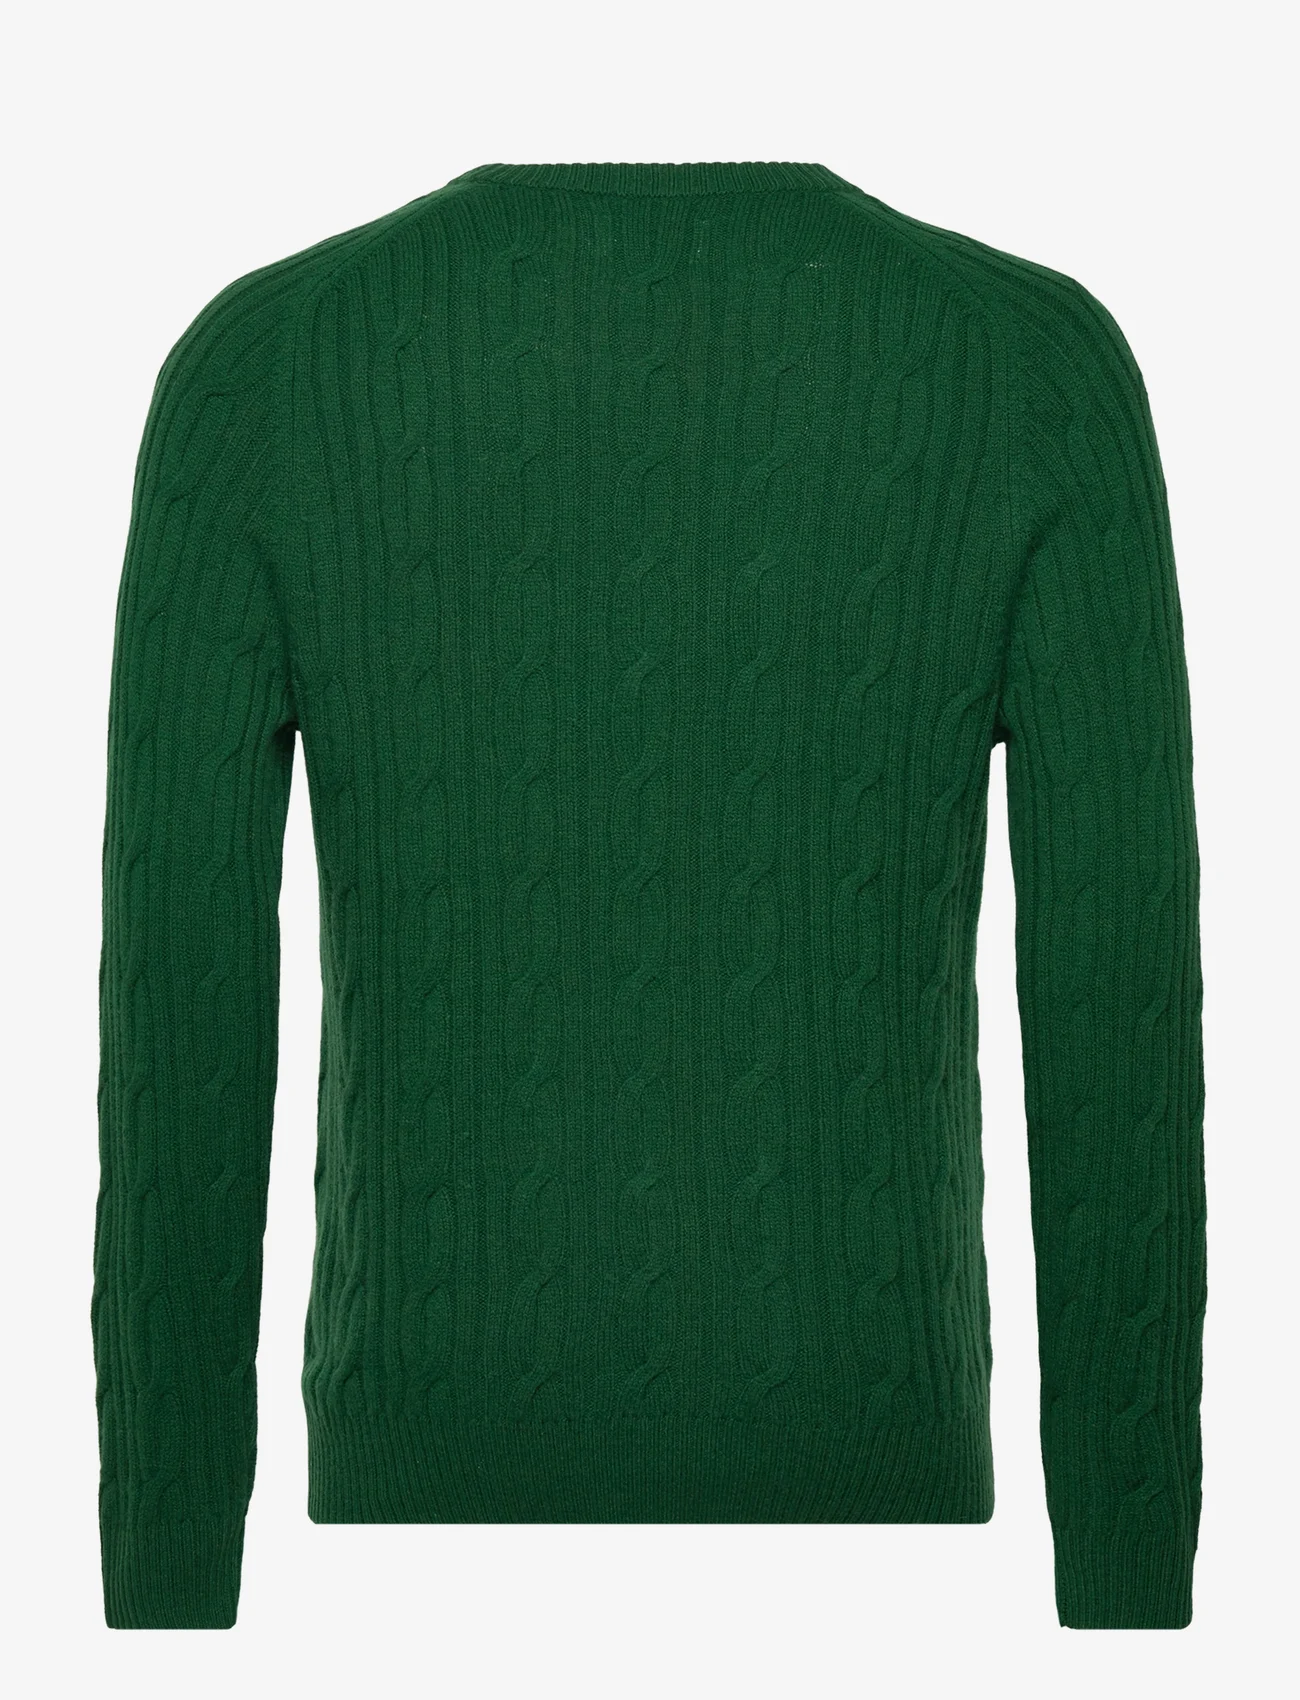 GANT - LAMBSWOOL CABLE C-NECK - rundhals - forest green - 1